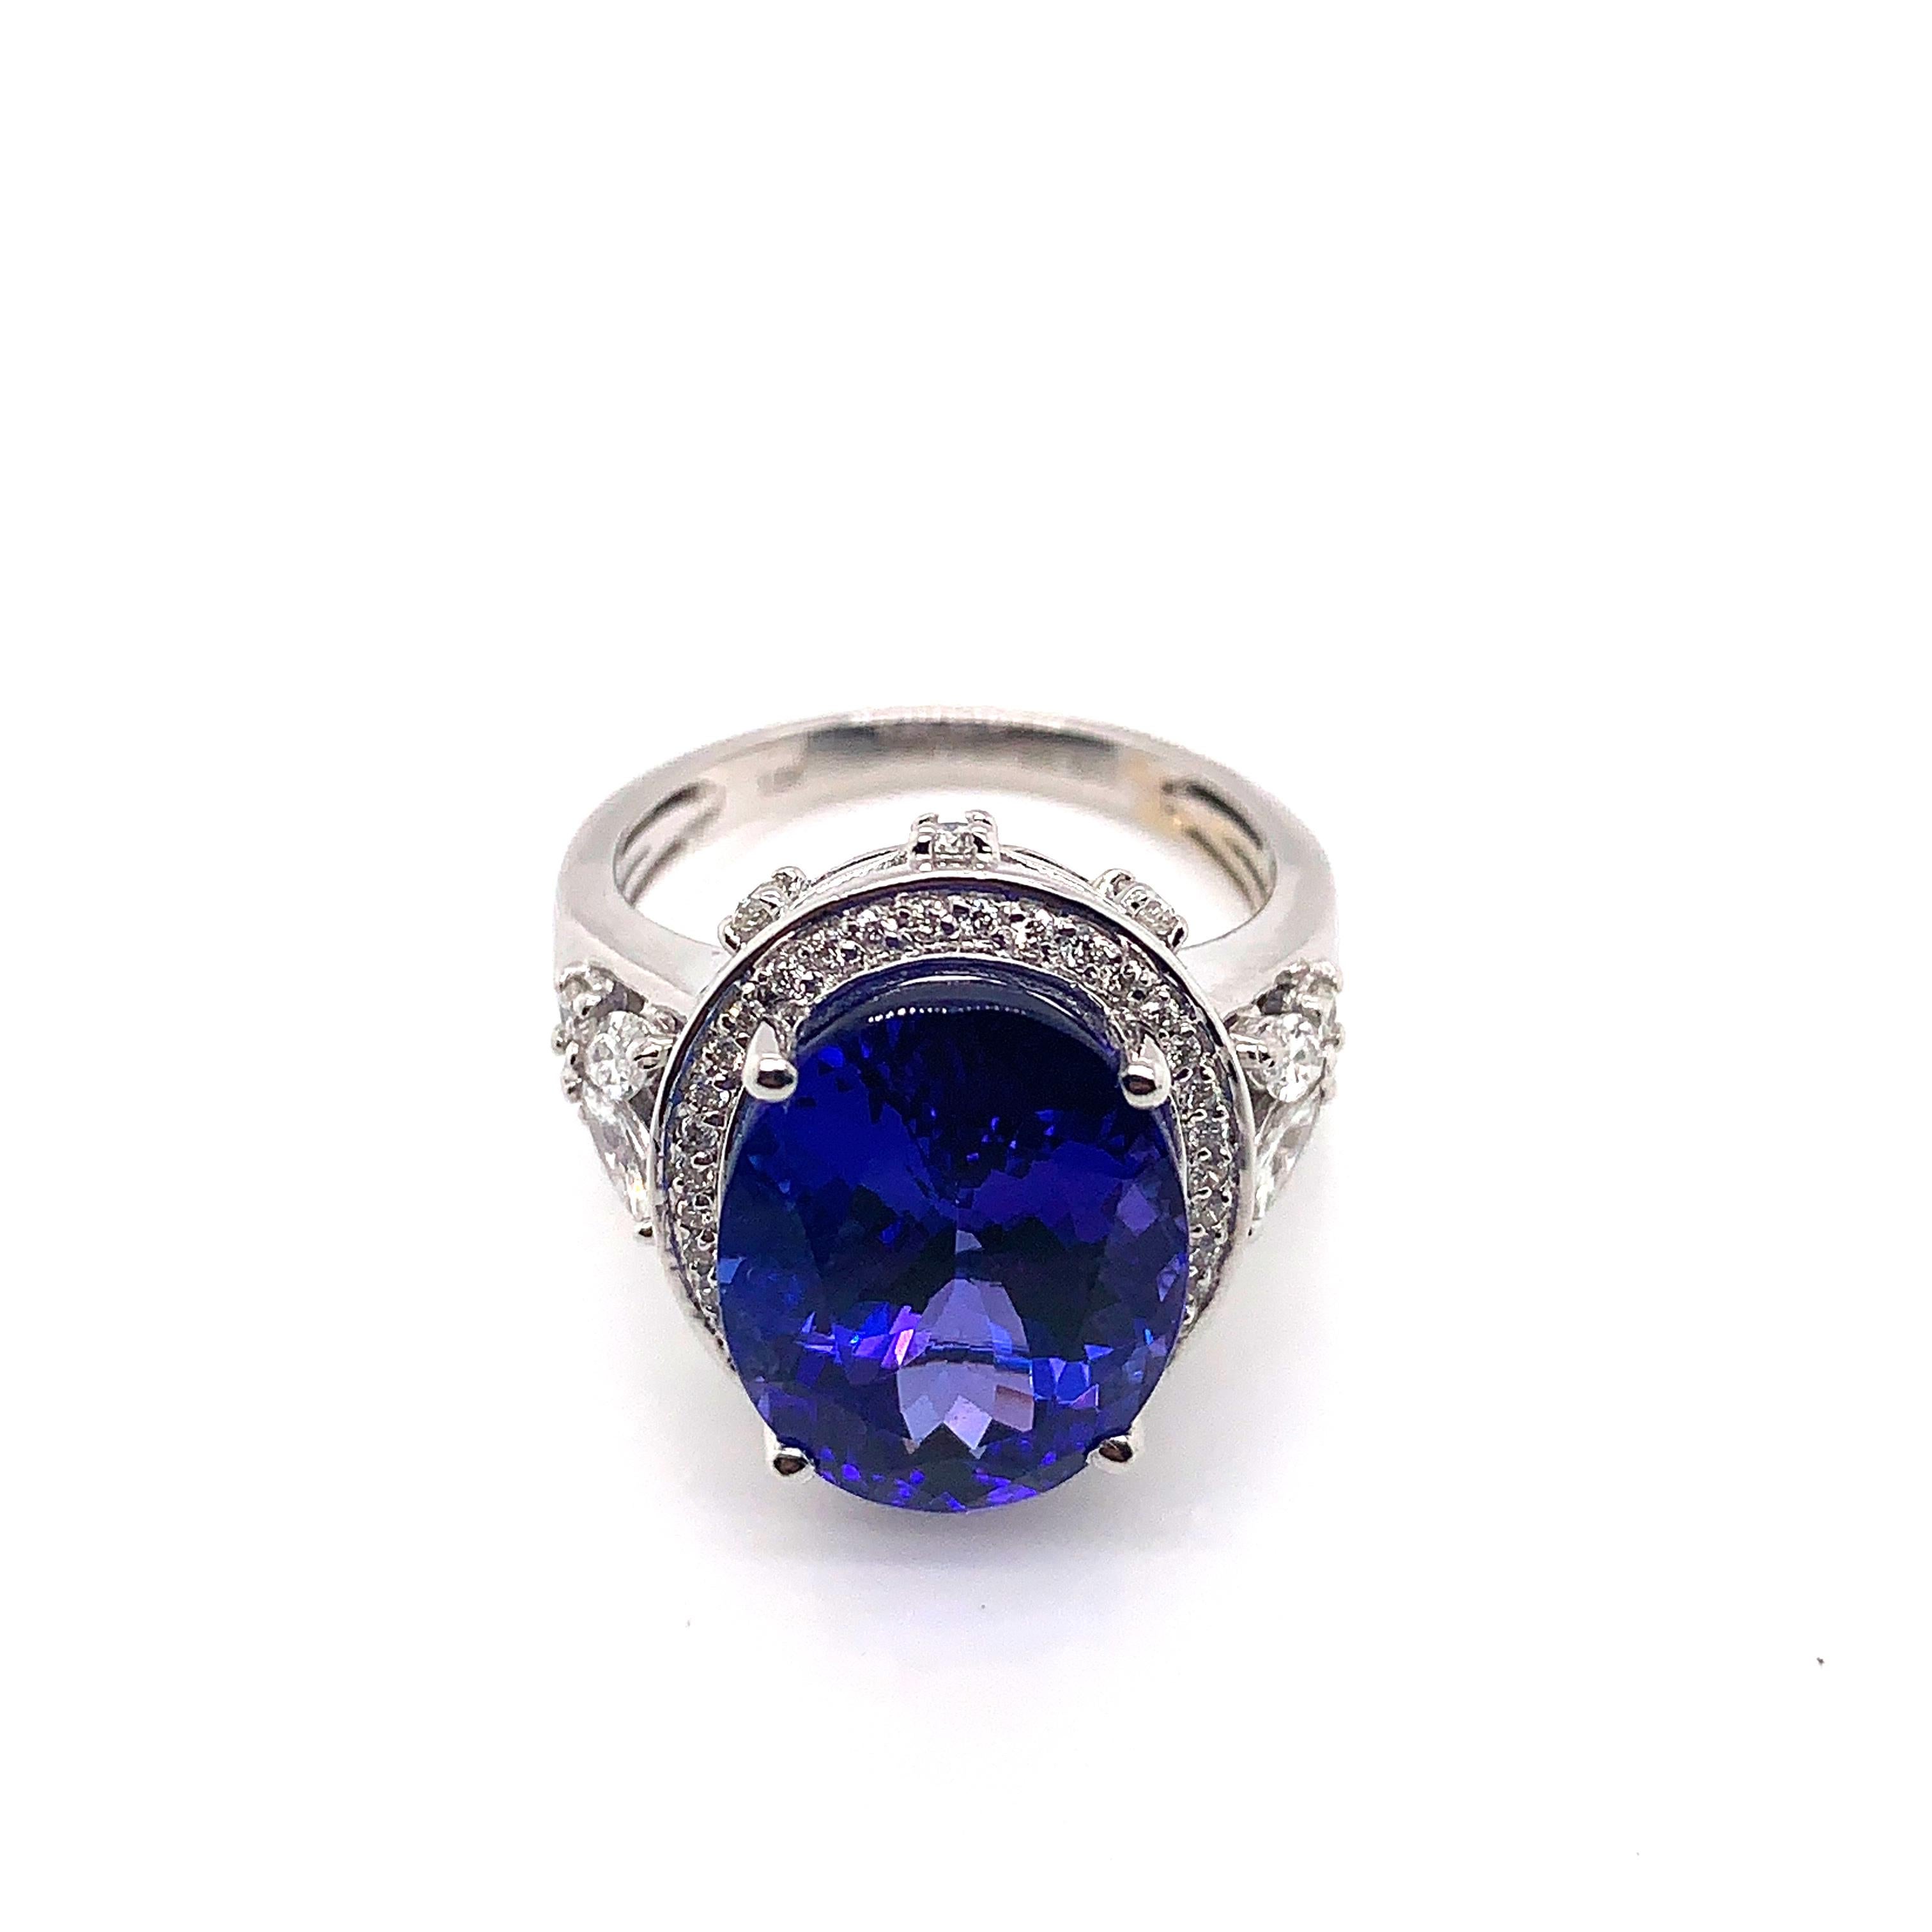 Oval Cut 9.01 Carat Oval Shaped Tanzanite Ring in 18 Karat White Gold with Diamonds For Sale